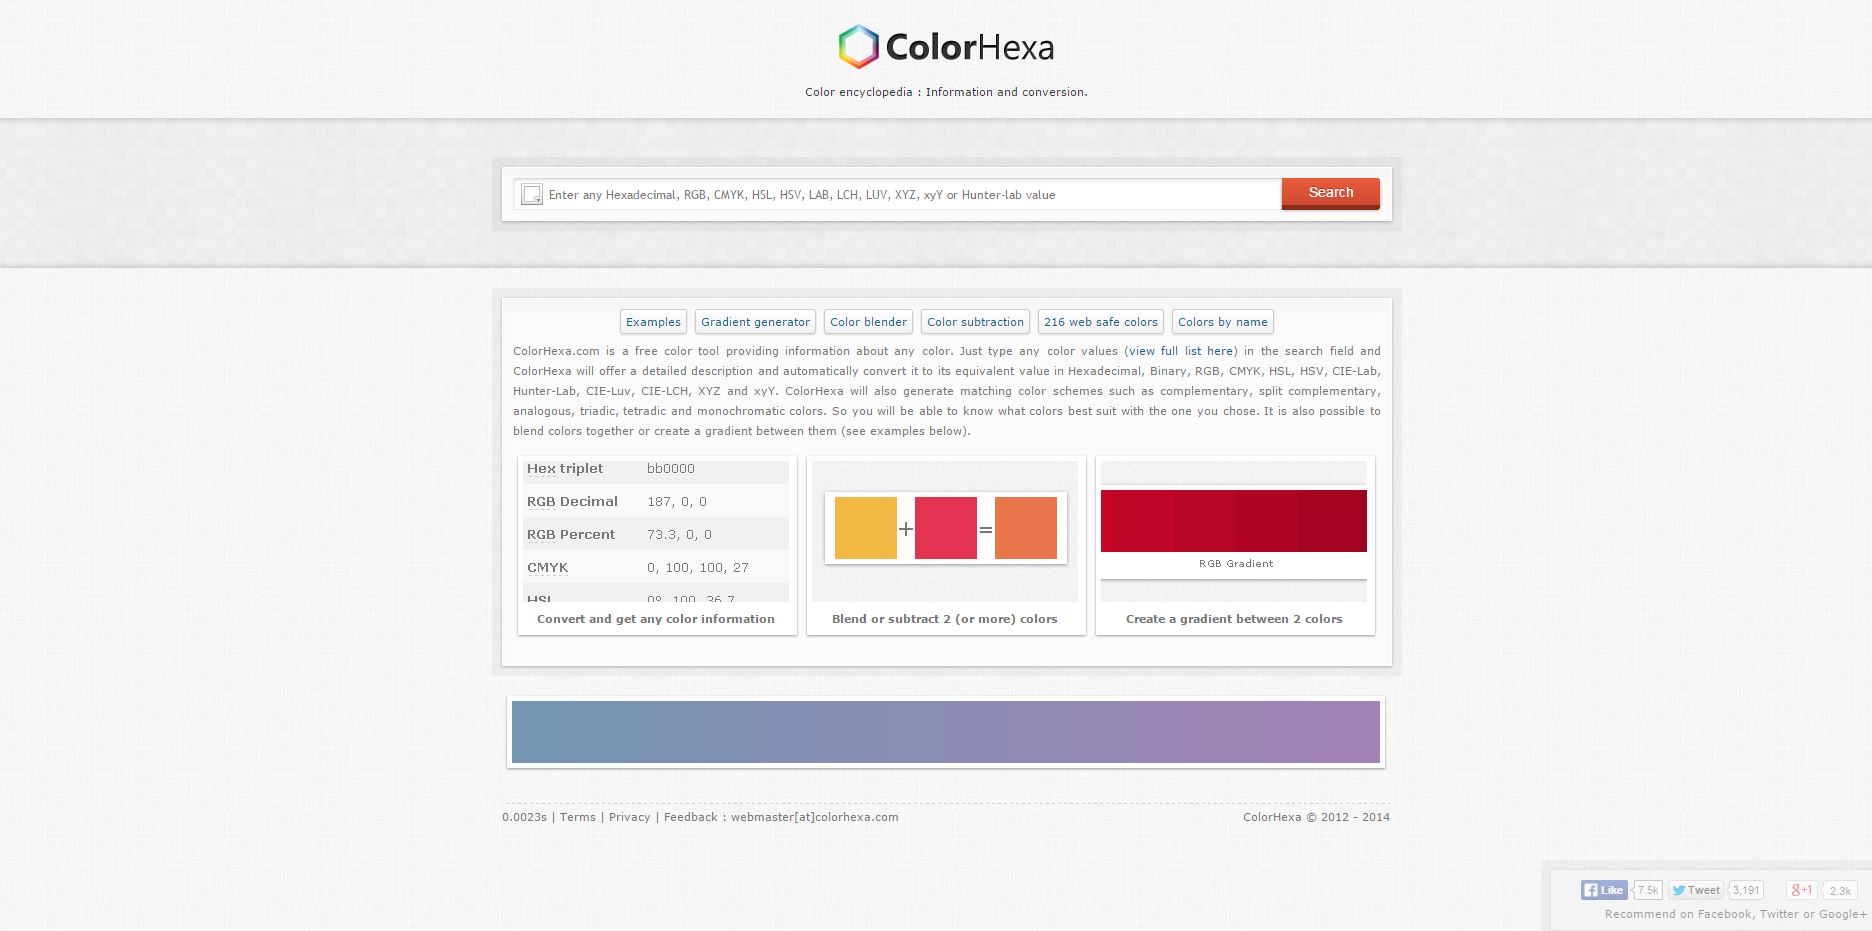 <a href="http://www.colorhexa.com/" target="_blank">colorhexa.com</a> - This website is your go-to resource for color codes. Find color palettes with color wheels and many other resources.